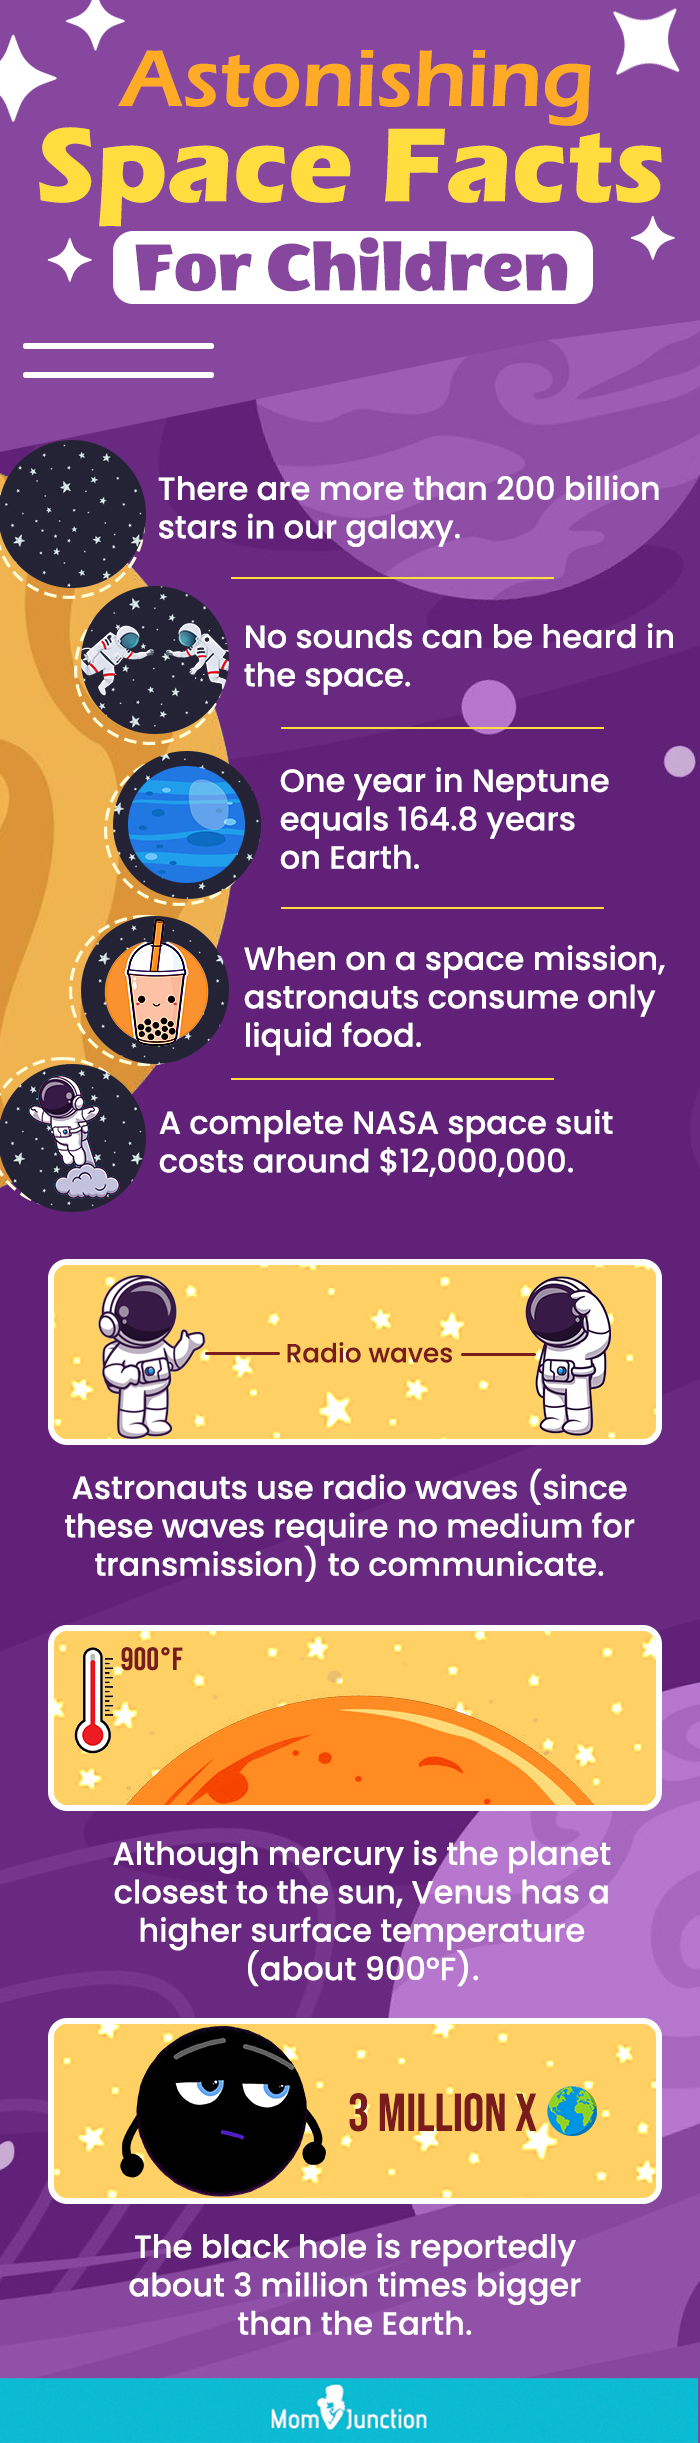 astonishing space facts (infographic)